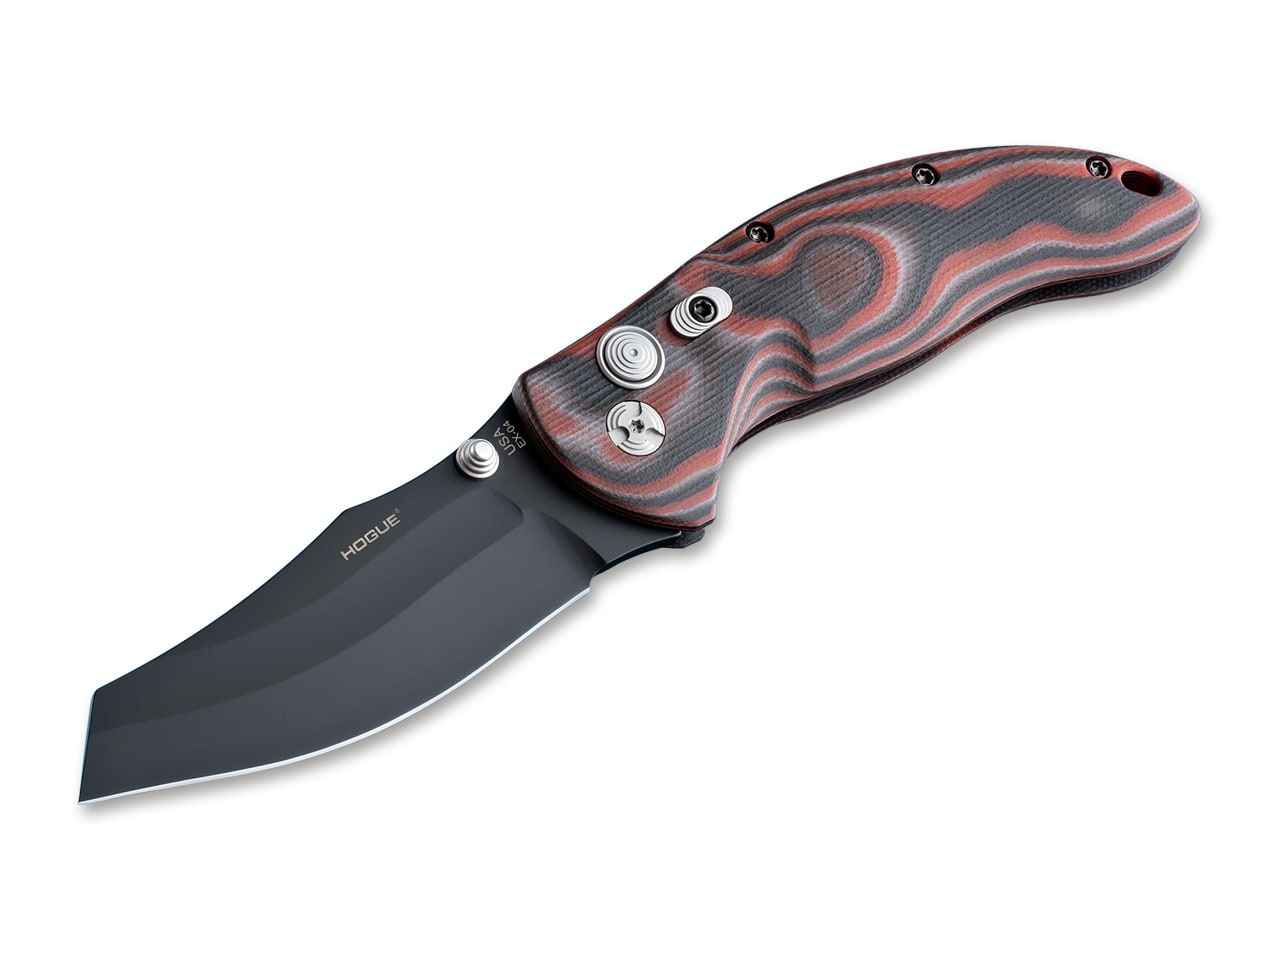 EX-04 3.5 Wharncliffe G-Mascus Red